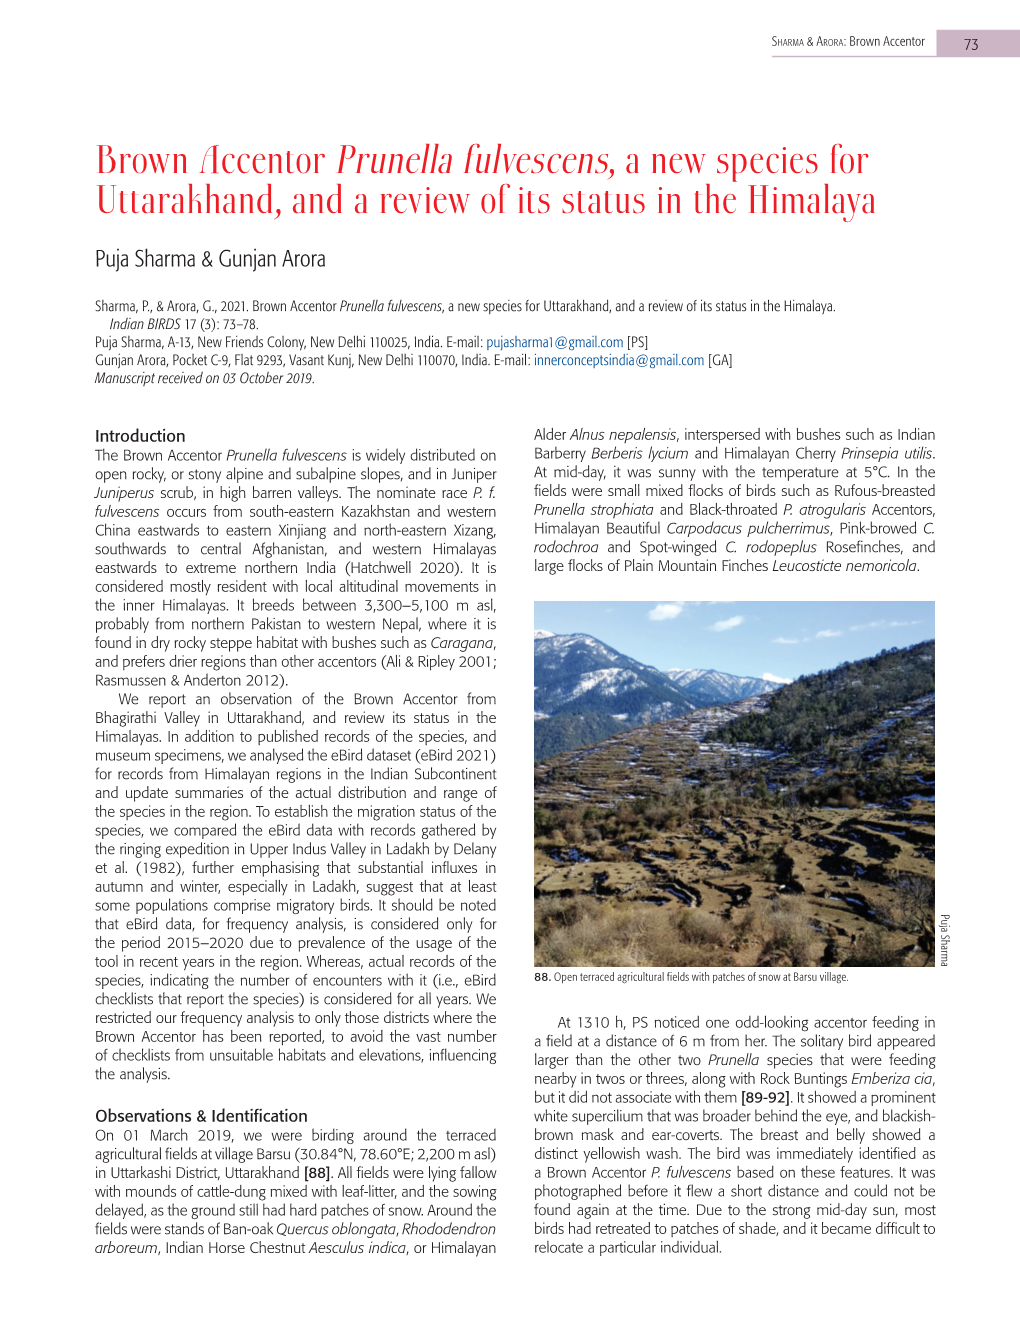 Brown Accentor Prunella Fulvescens, a New Species for Uttarakhand, and a Review of Its Status in the Himalaya